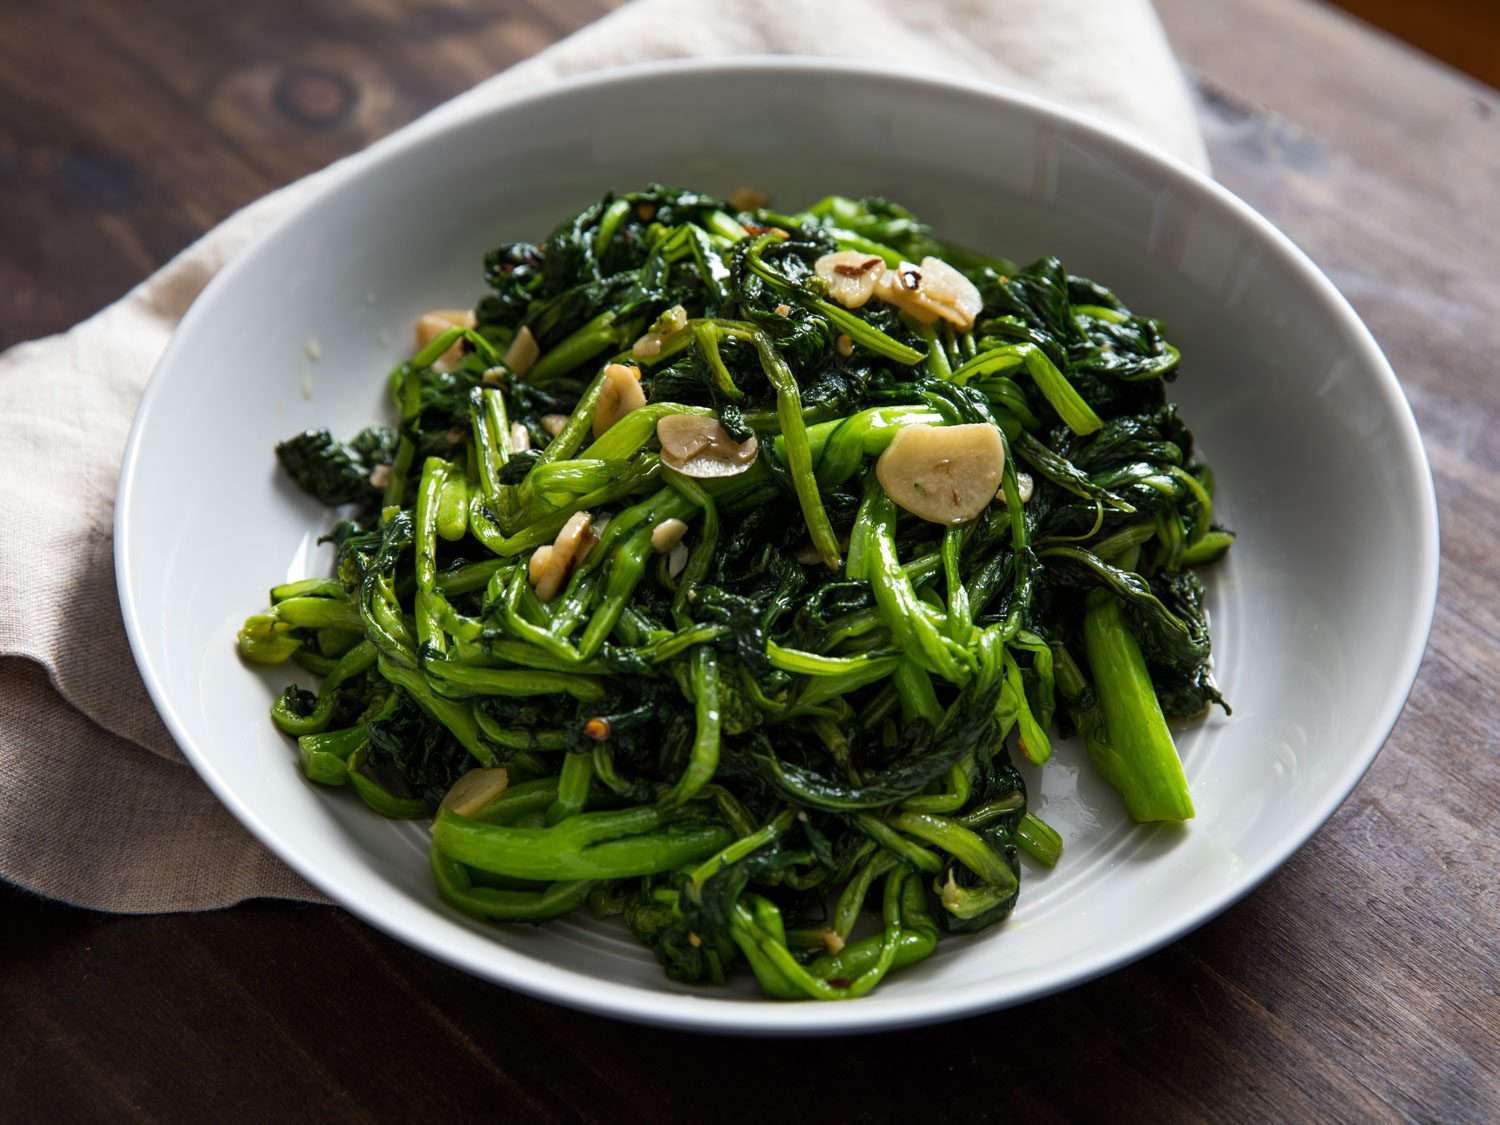 A white bowl of sautéed broccoli rabe, studded with garlic slices and chile flakes.